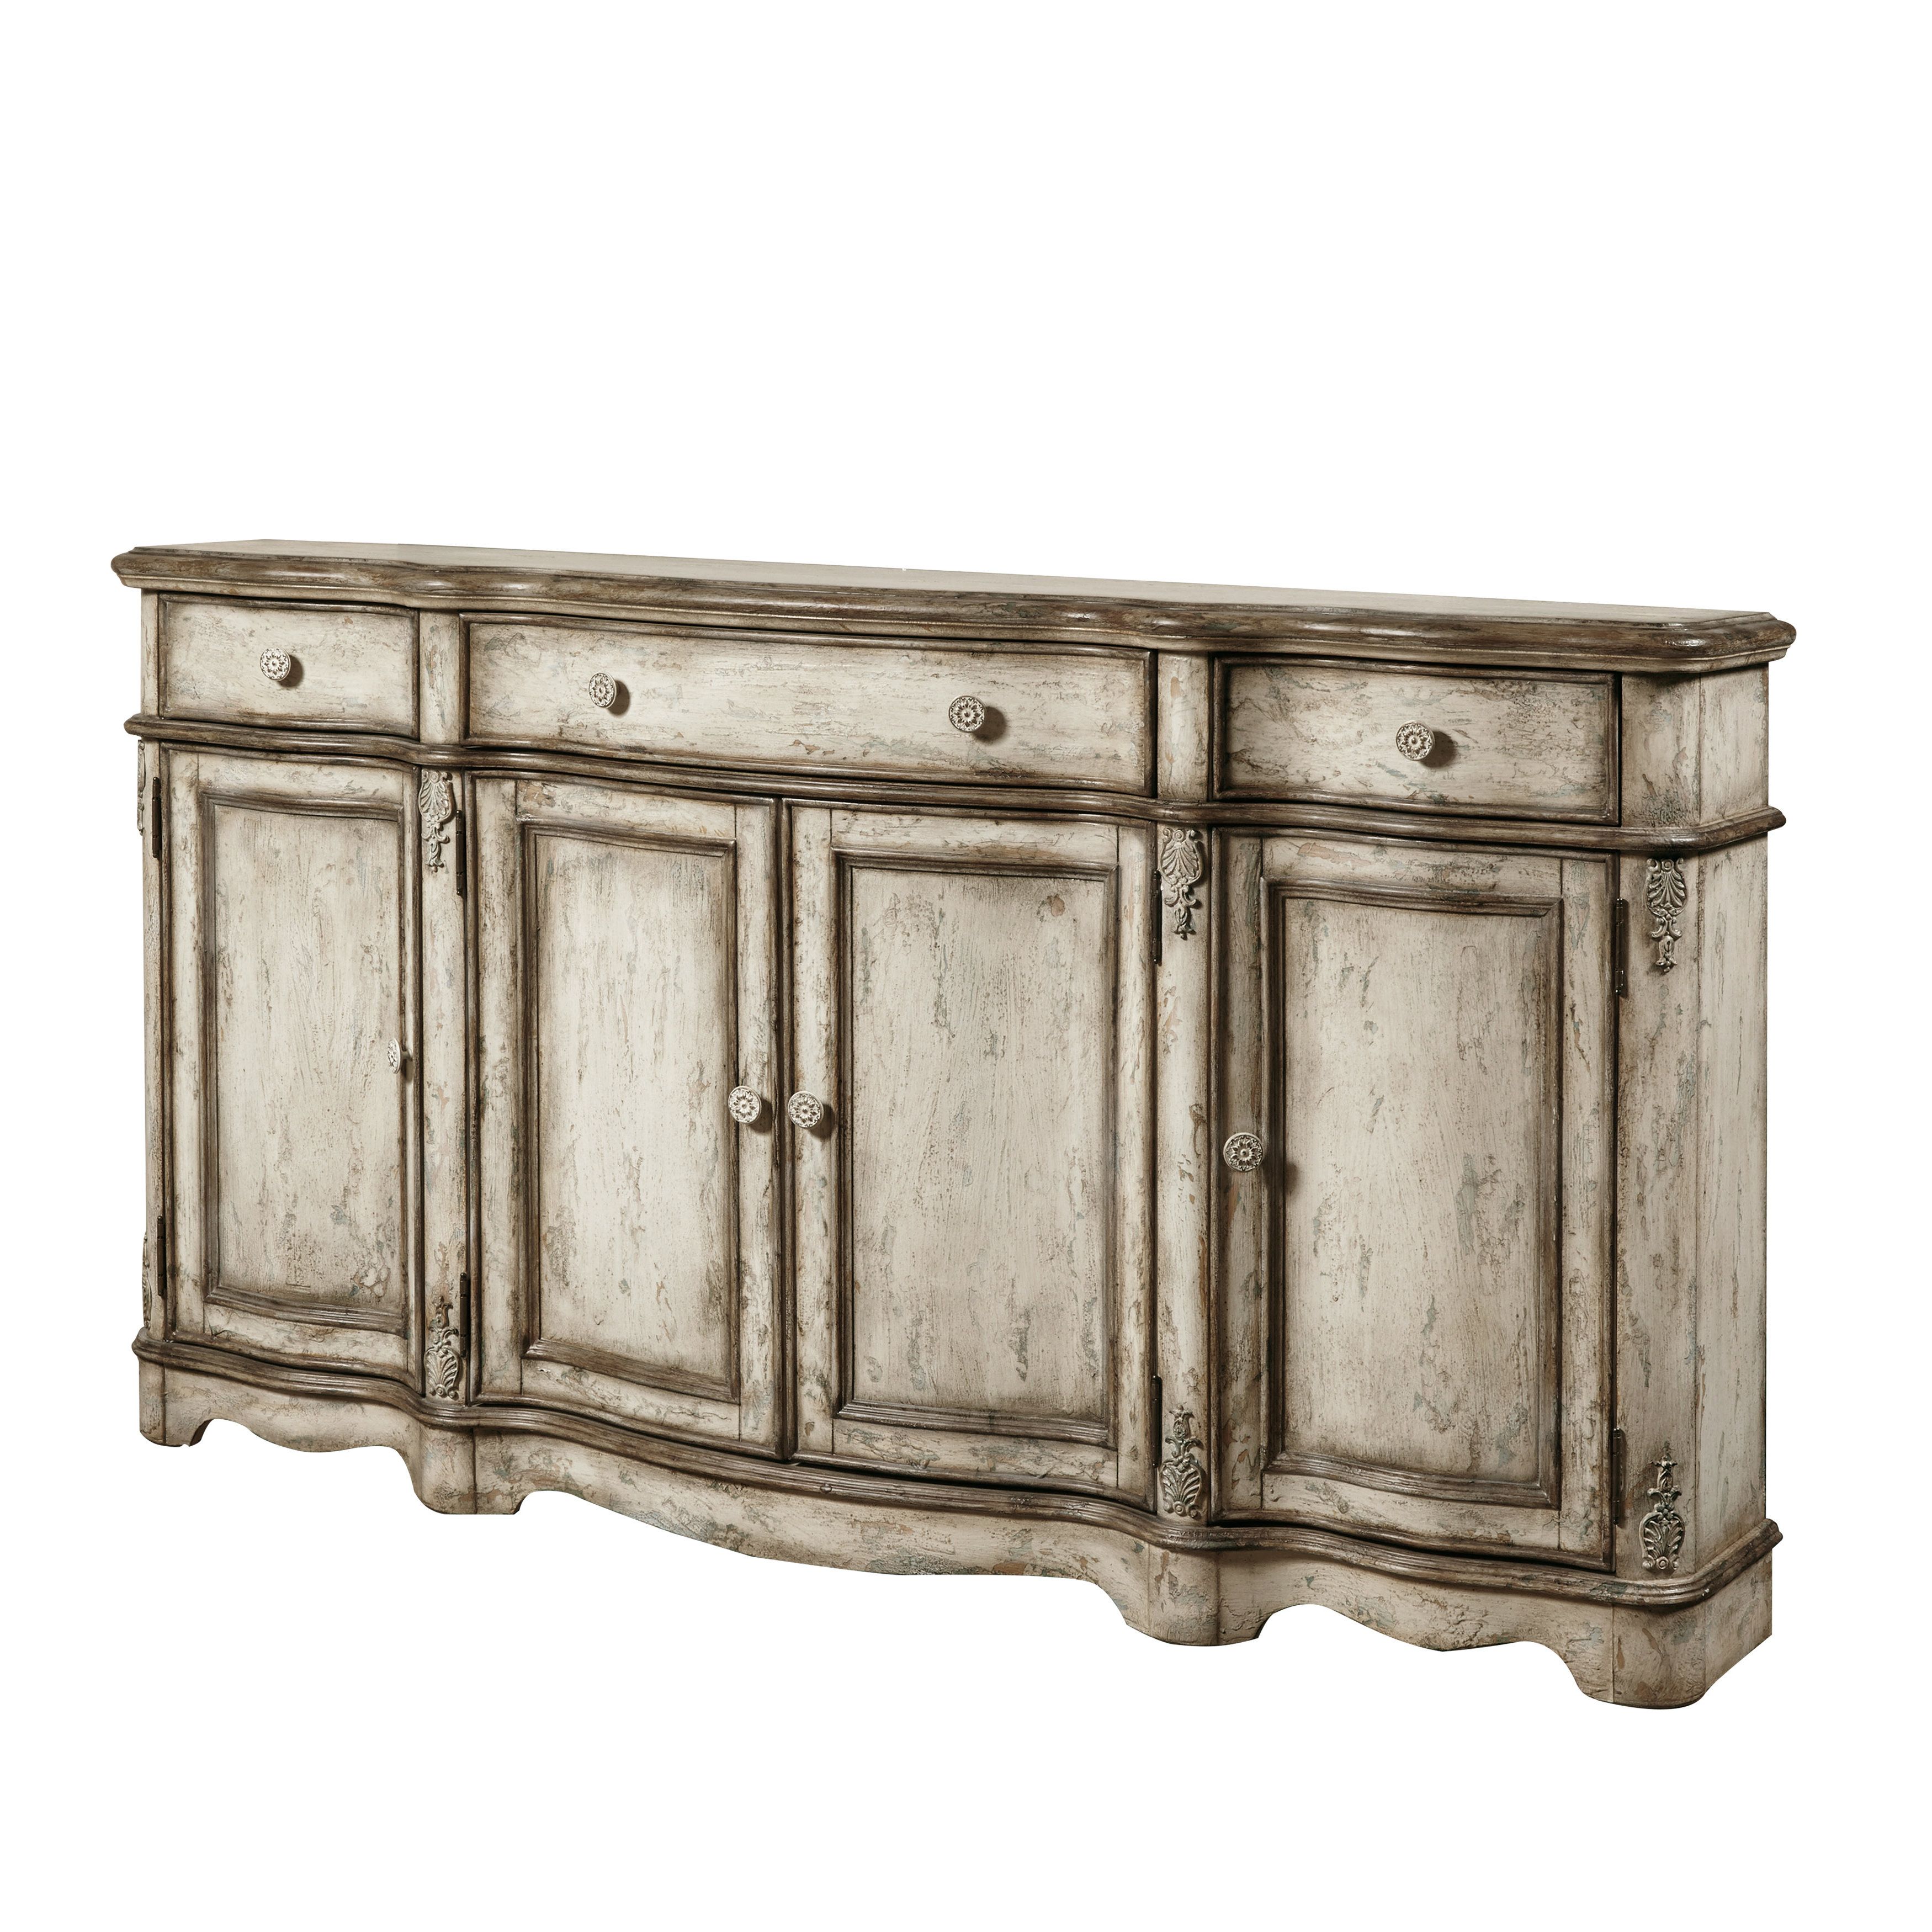 Farmhouse & Rustic Lark Manor Sideboards & Buffets | Birch Lane Throughout Recent Raquette Sideboards (View 9 of 20)